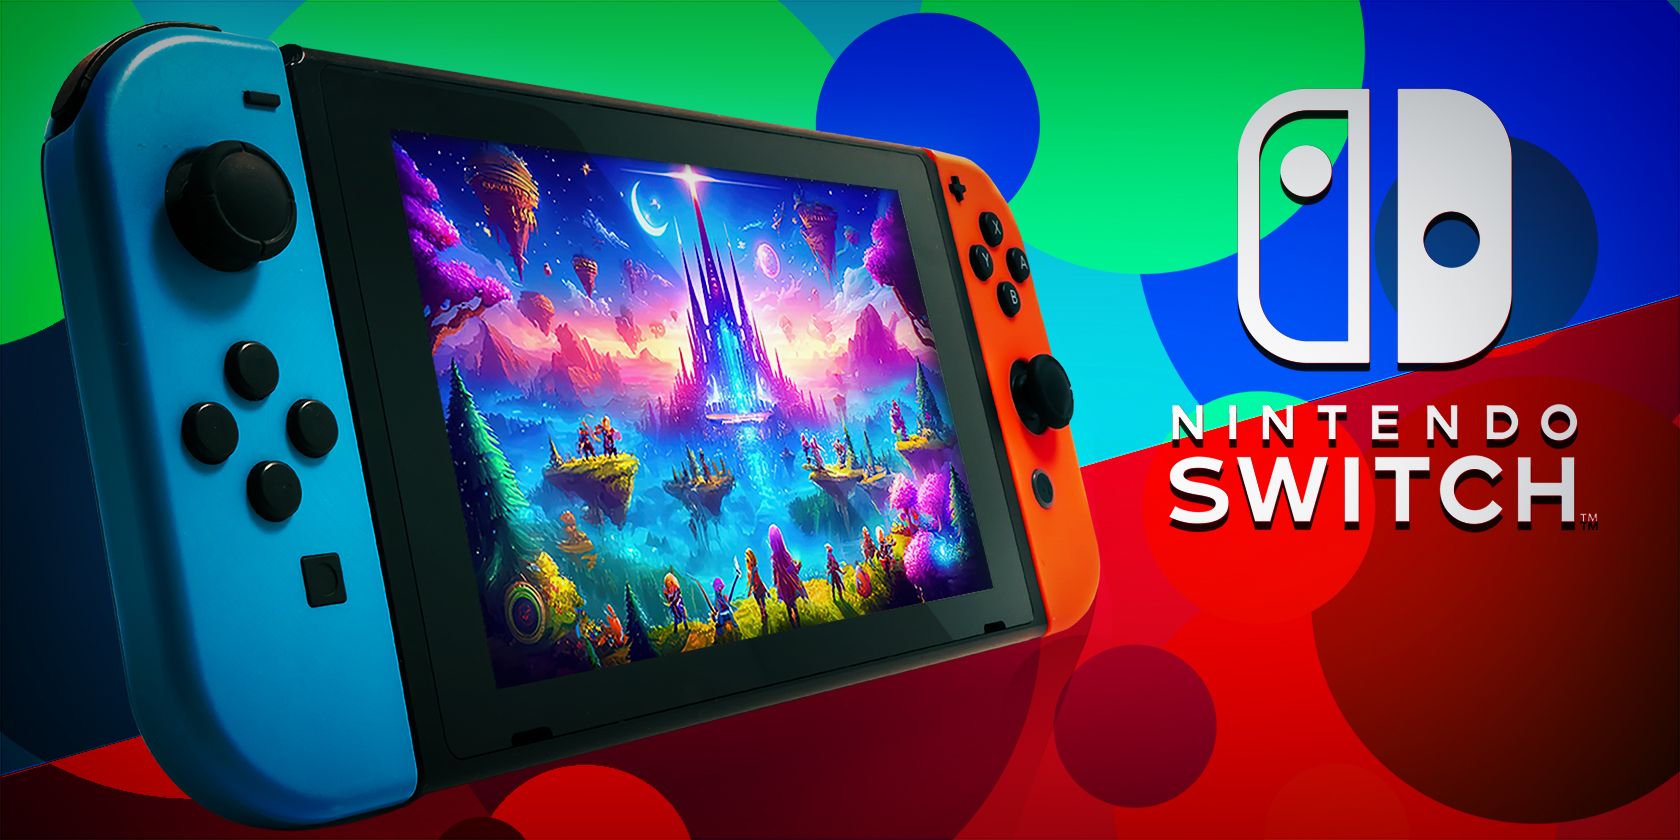 A Nintendo switch displaying a game on a colorful background